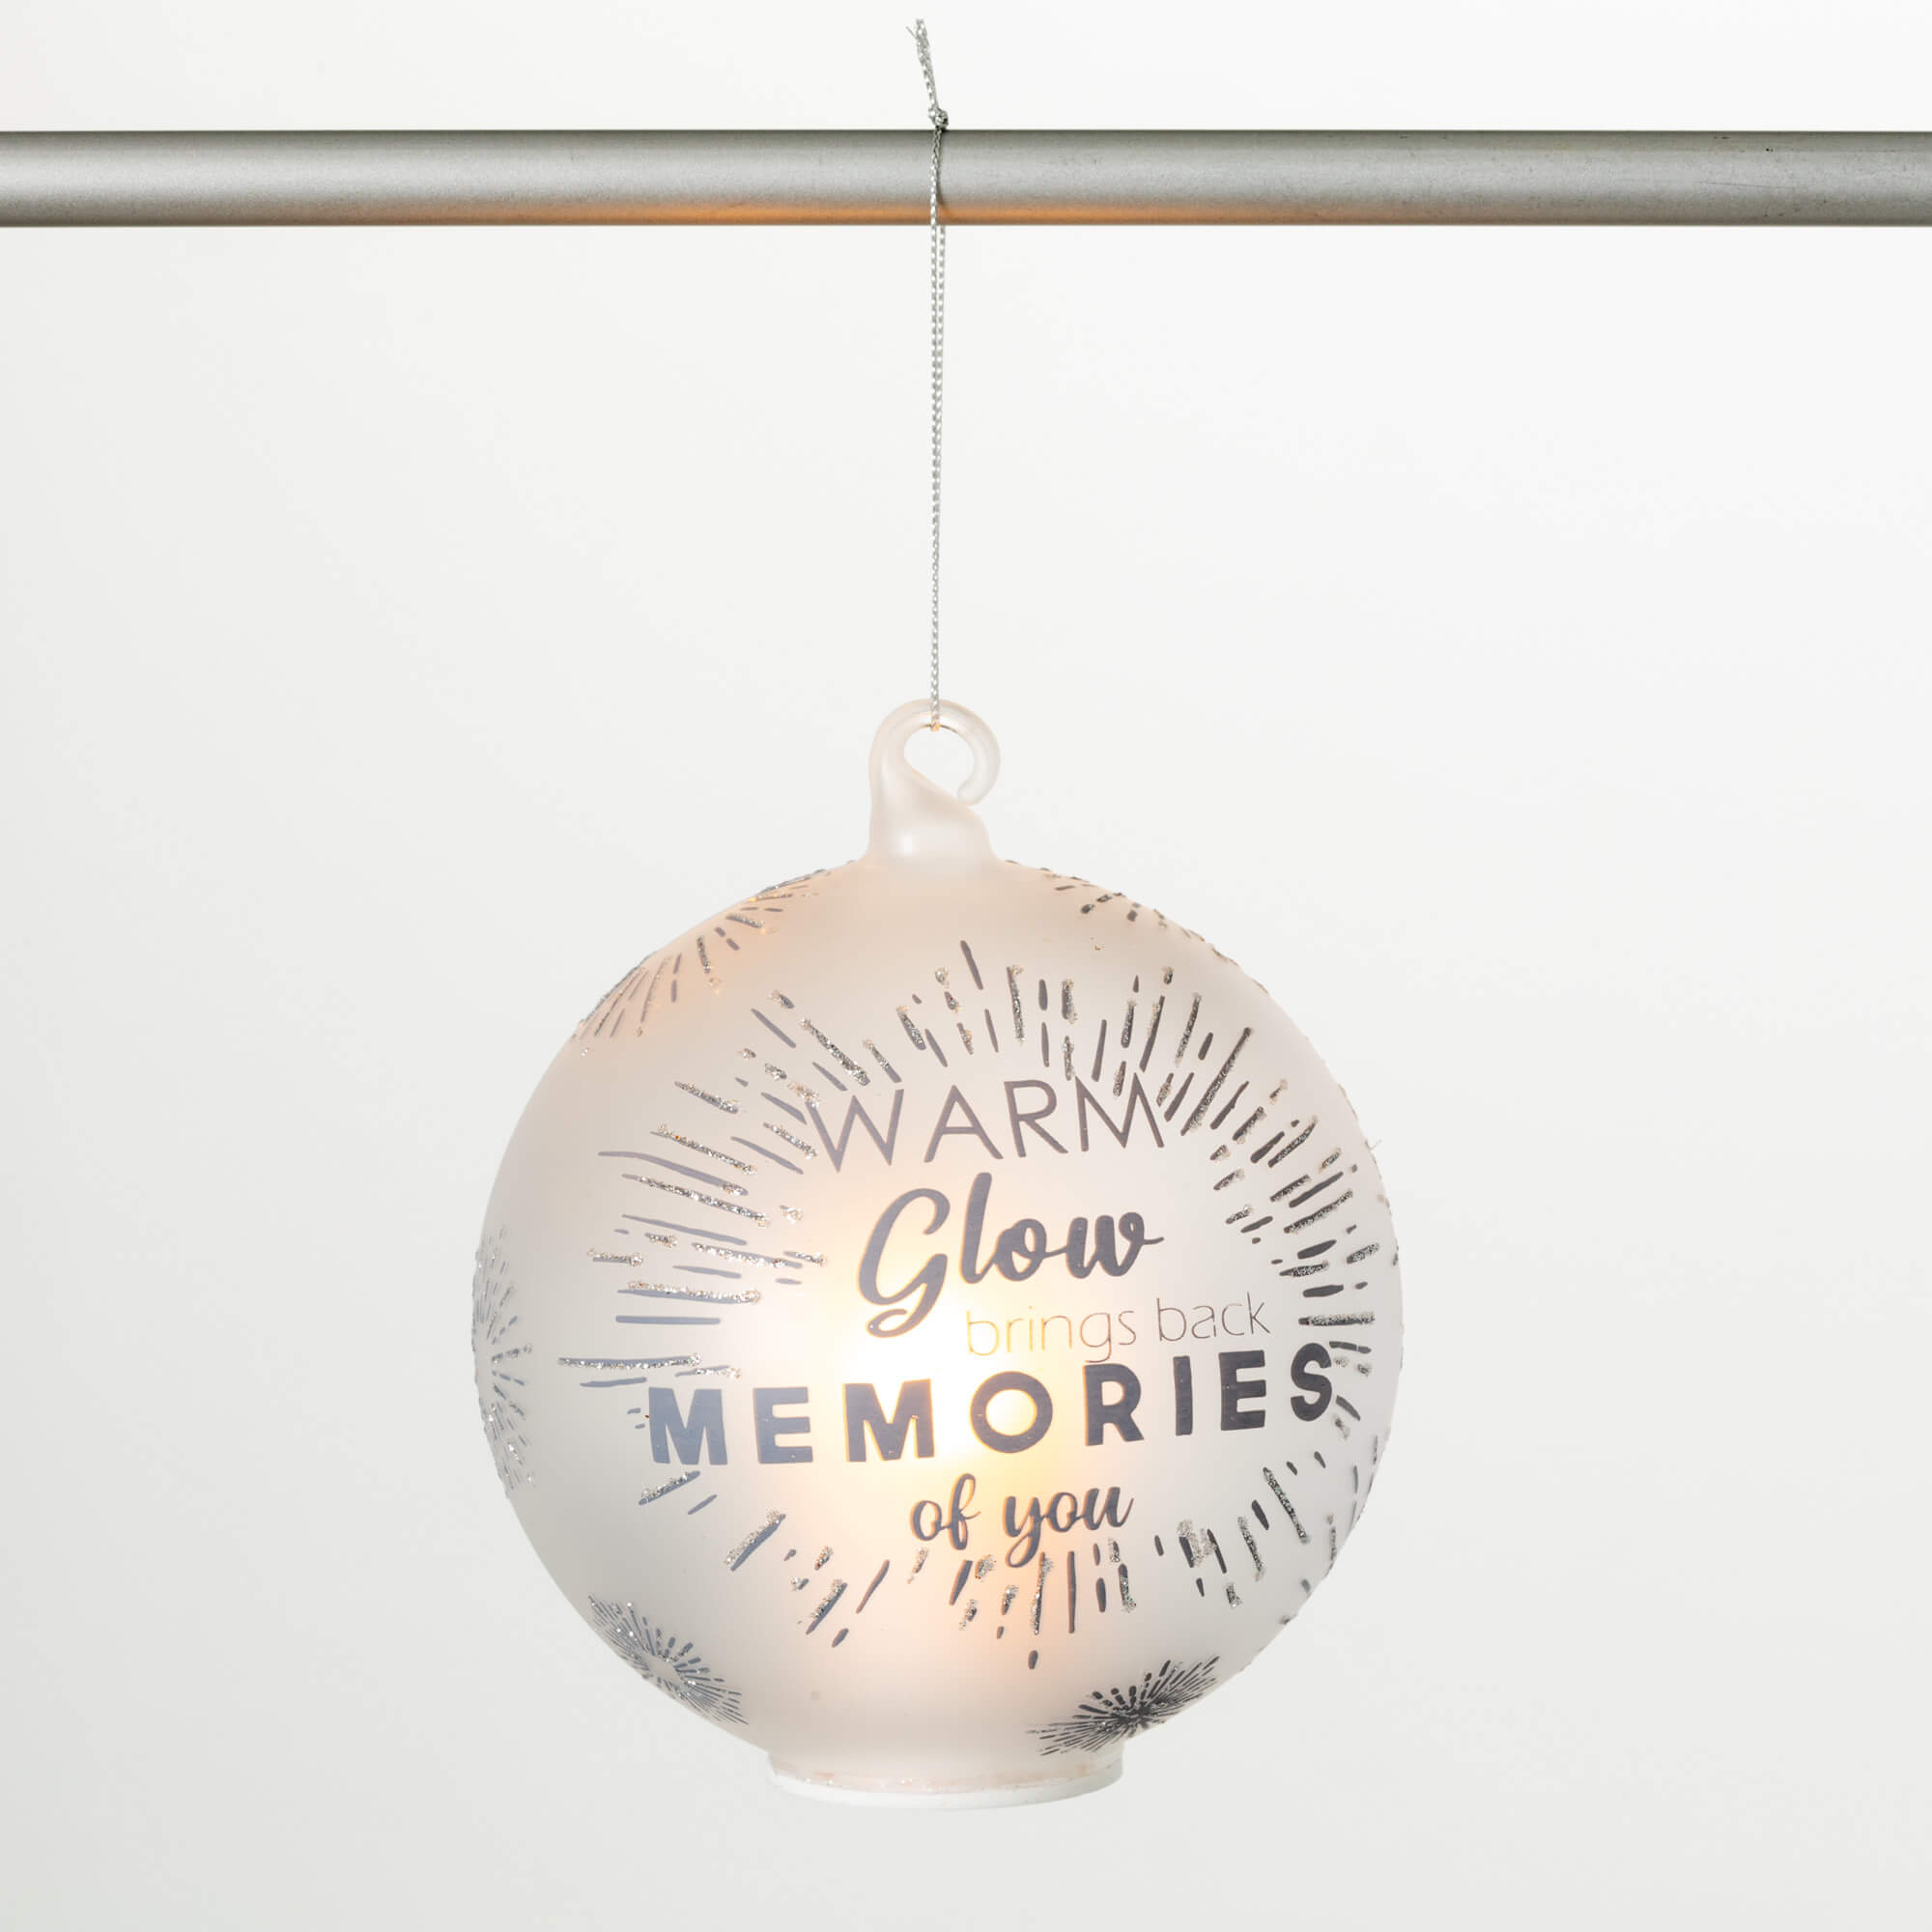 LED MEMORIES OF YOU ORNAMENT